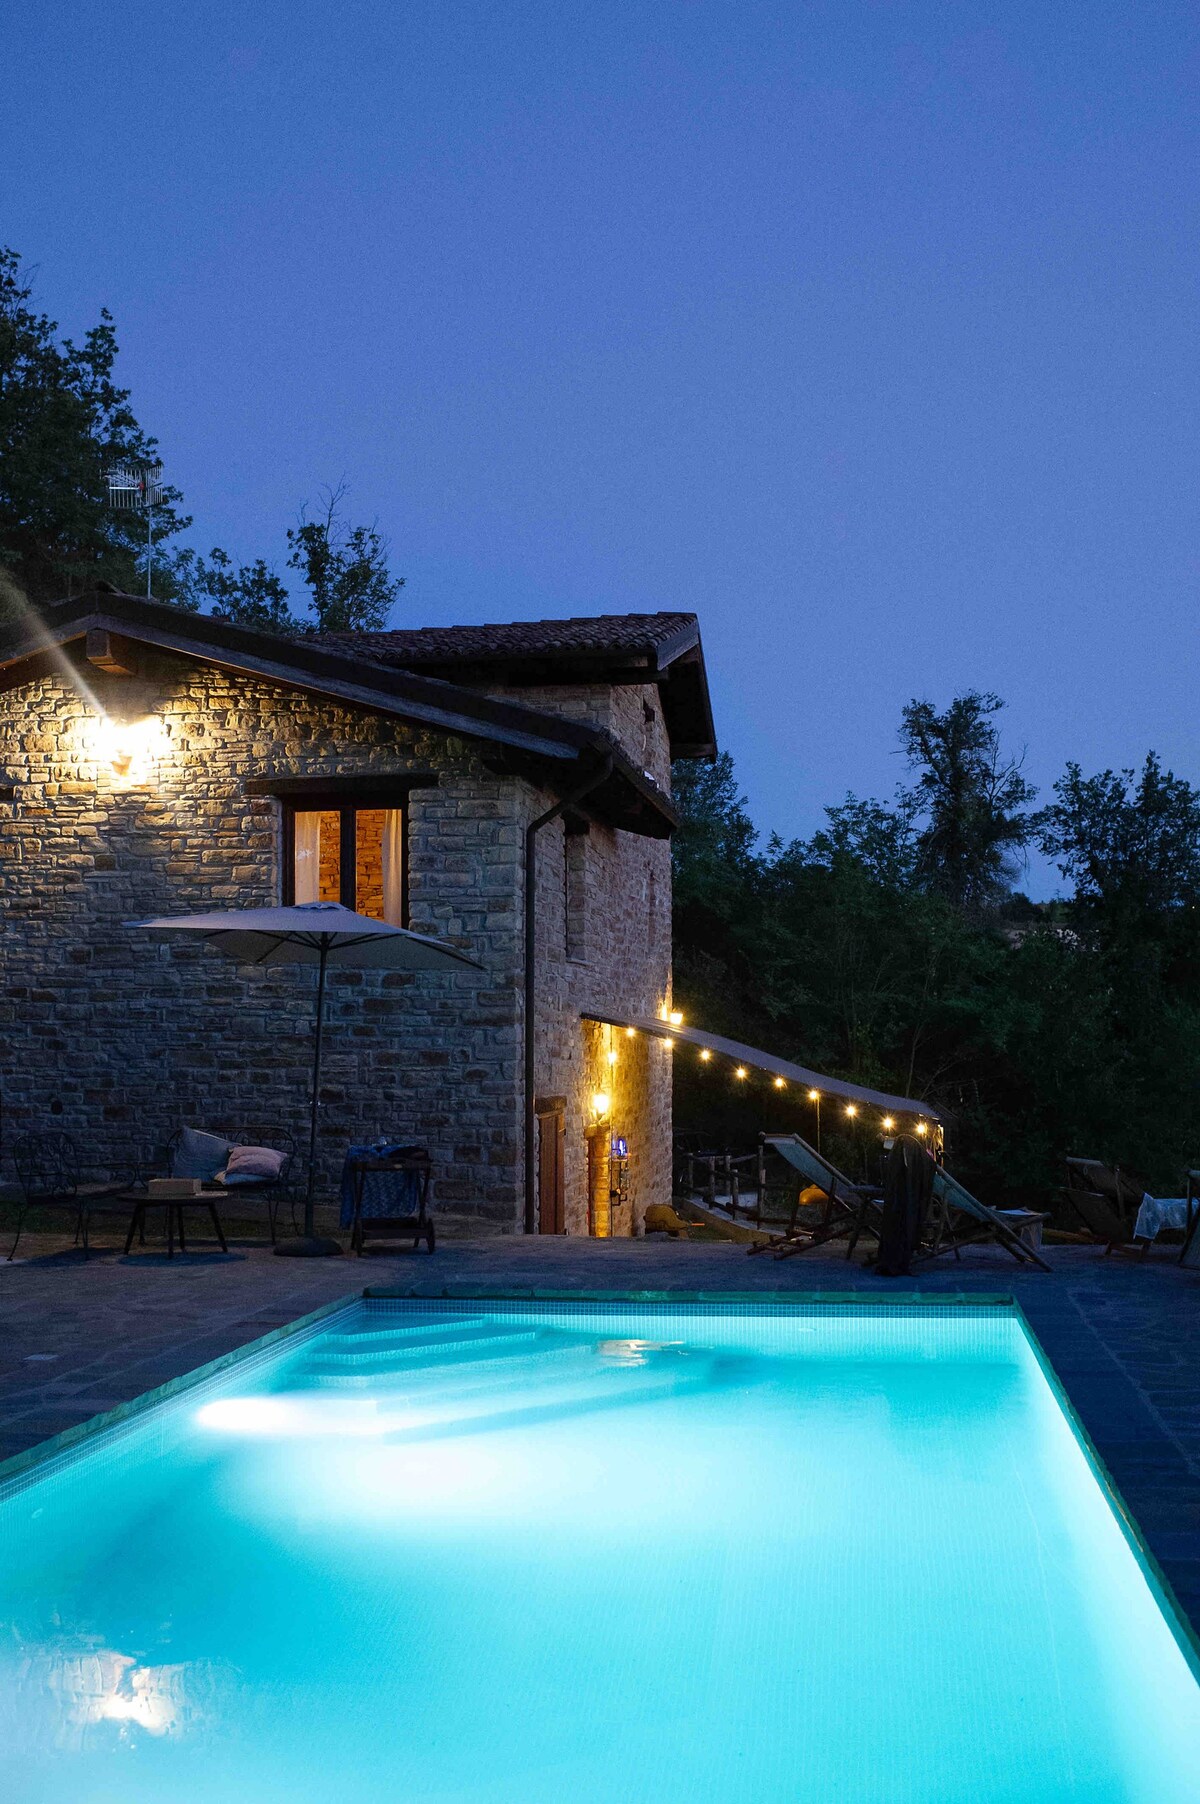 Vacation home with swimming pool in Piemonte